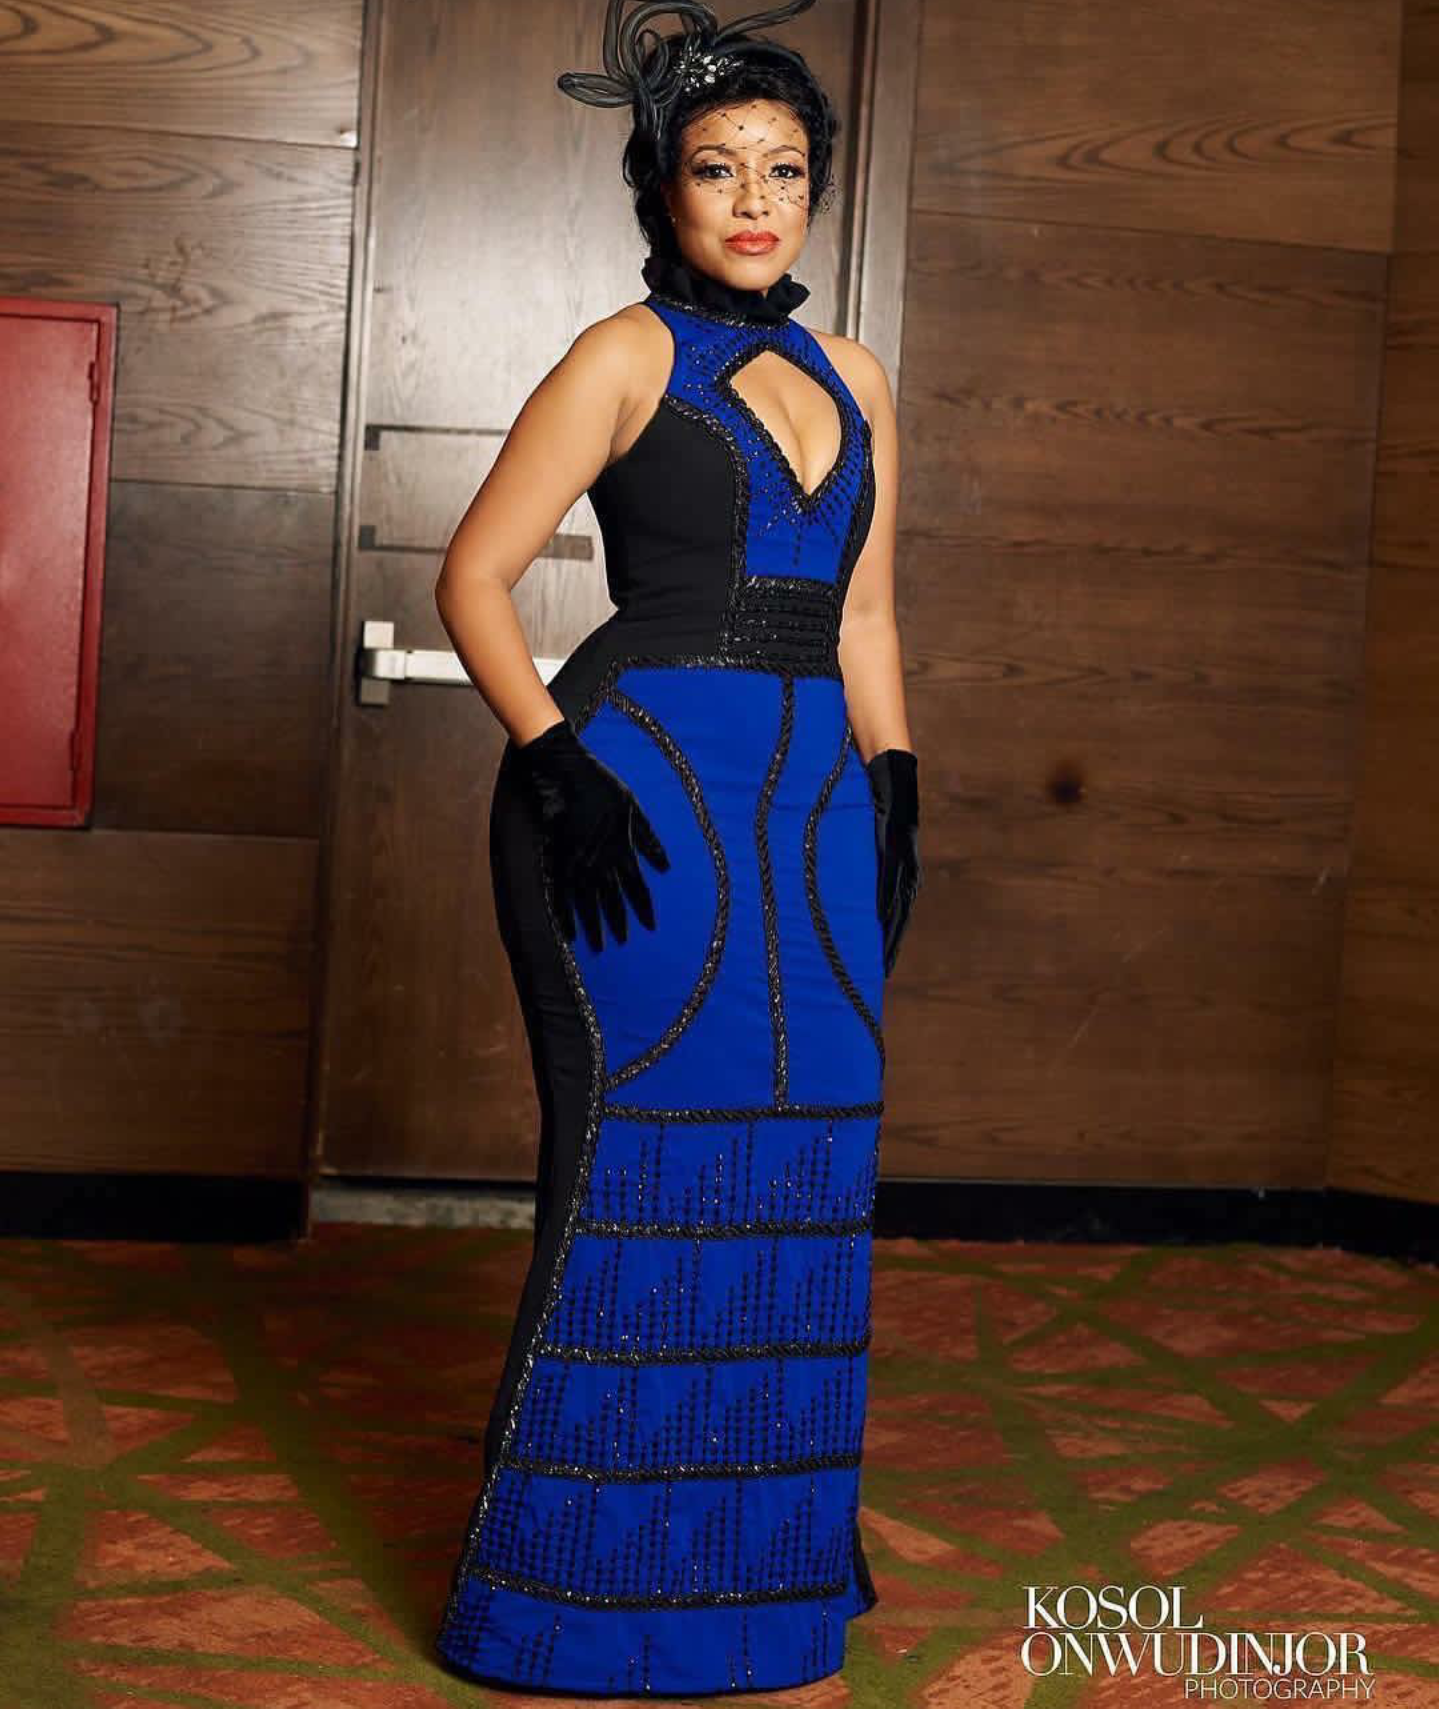 Joselyn Dumas served us slay goals in this look